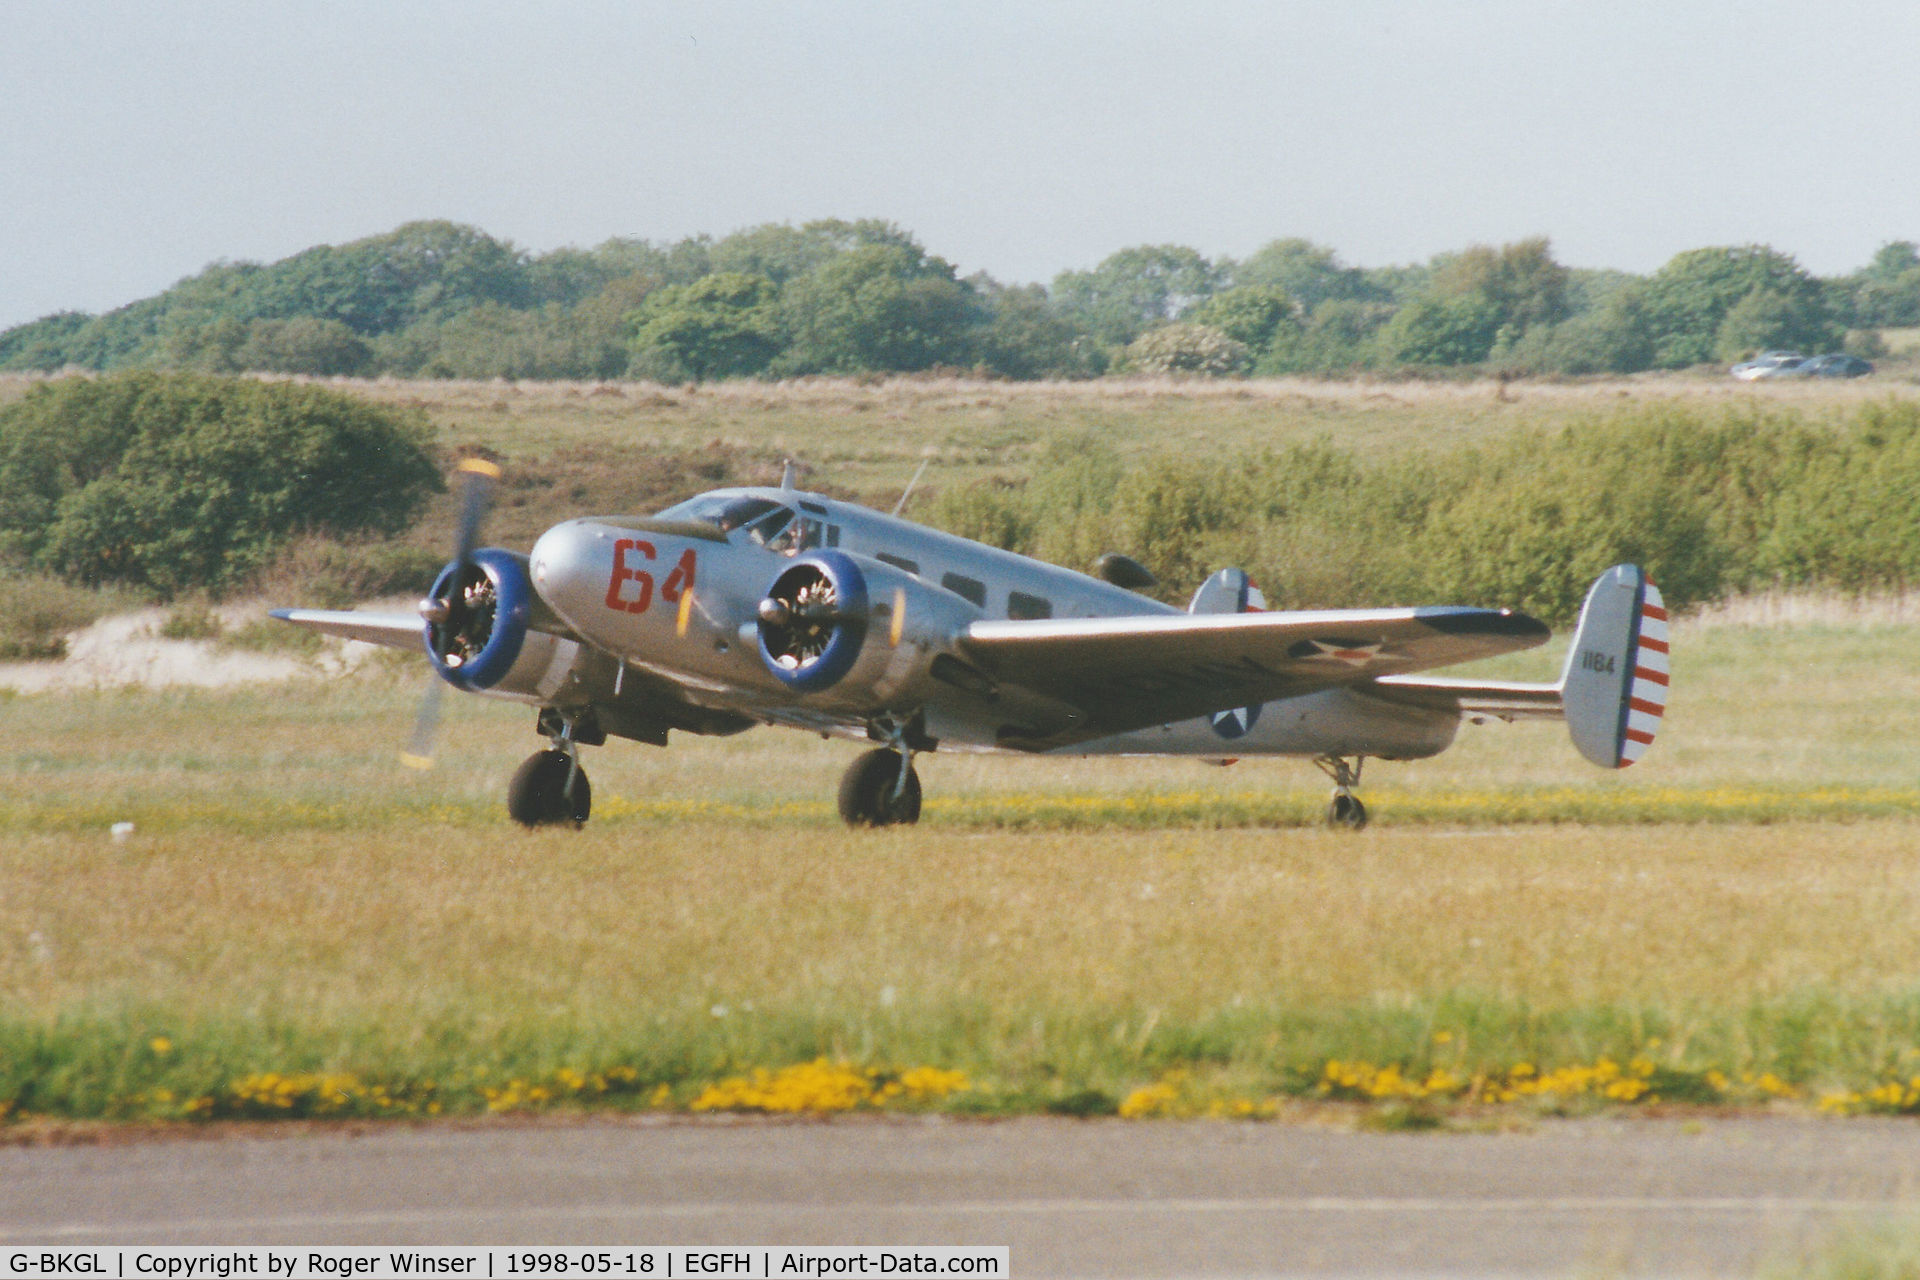 G-BKGL, 1952 Beech Expeditor 3TM C/N CA-164 (A-764), Visiting Expeditor In USAAC colour scheme and coded 64.